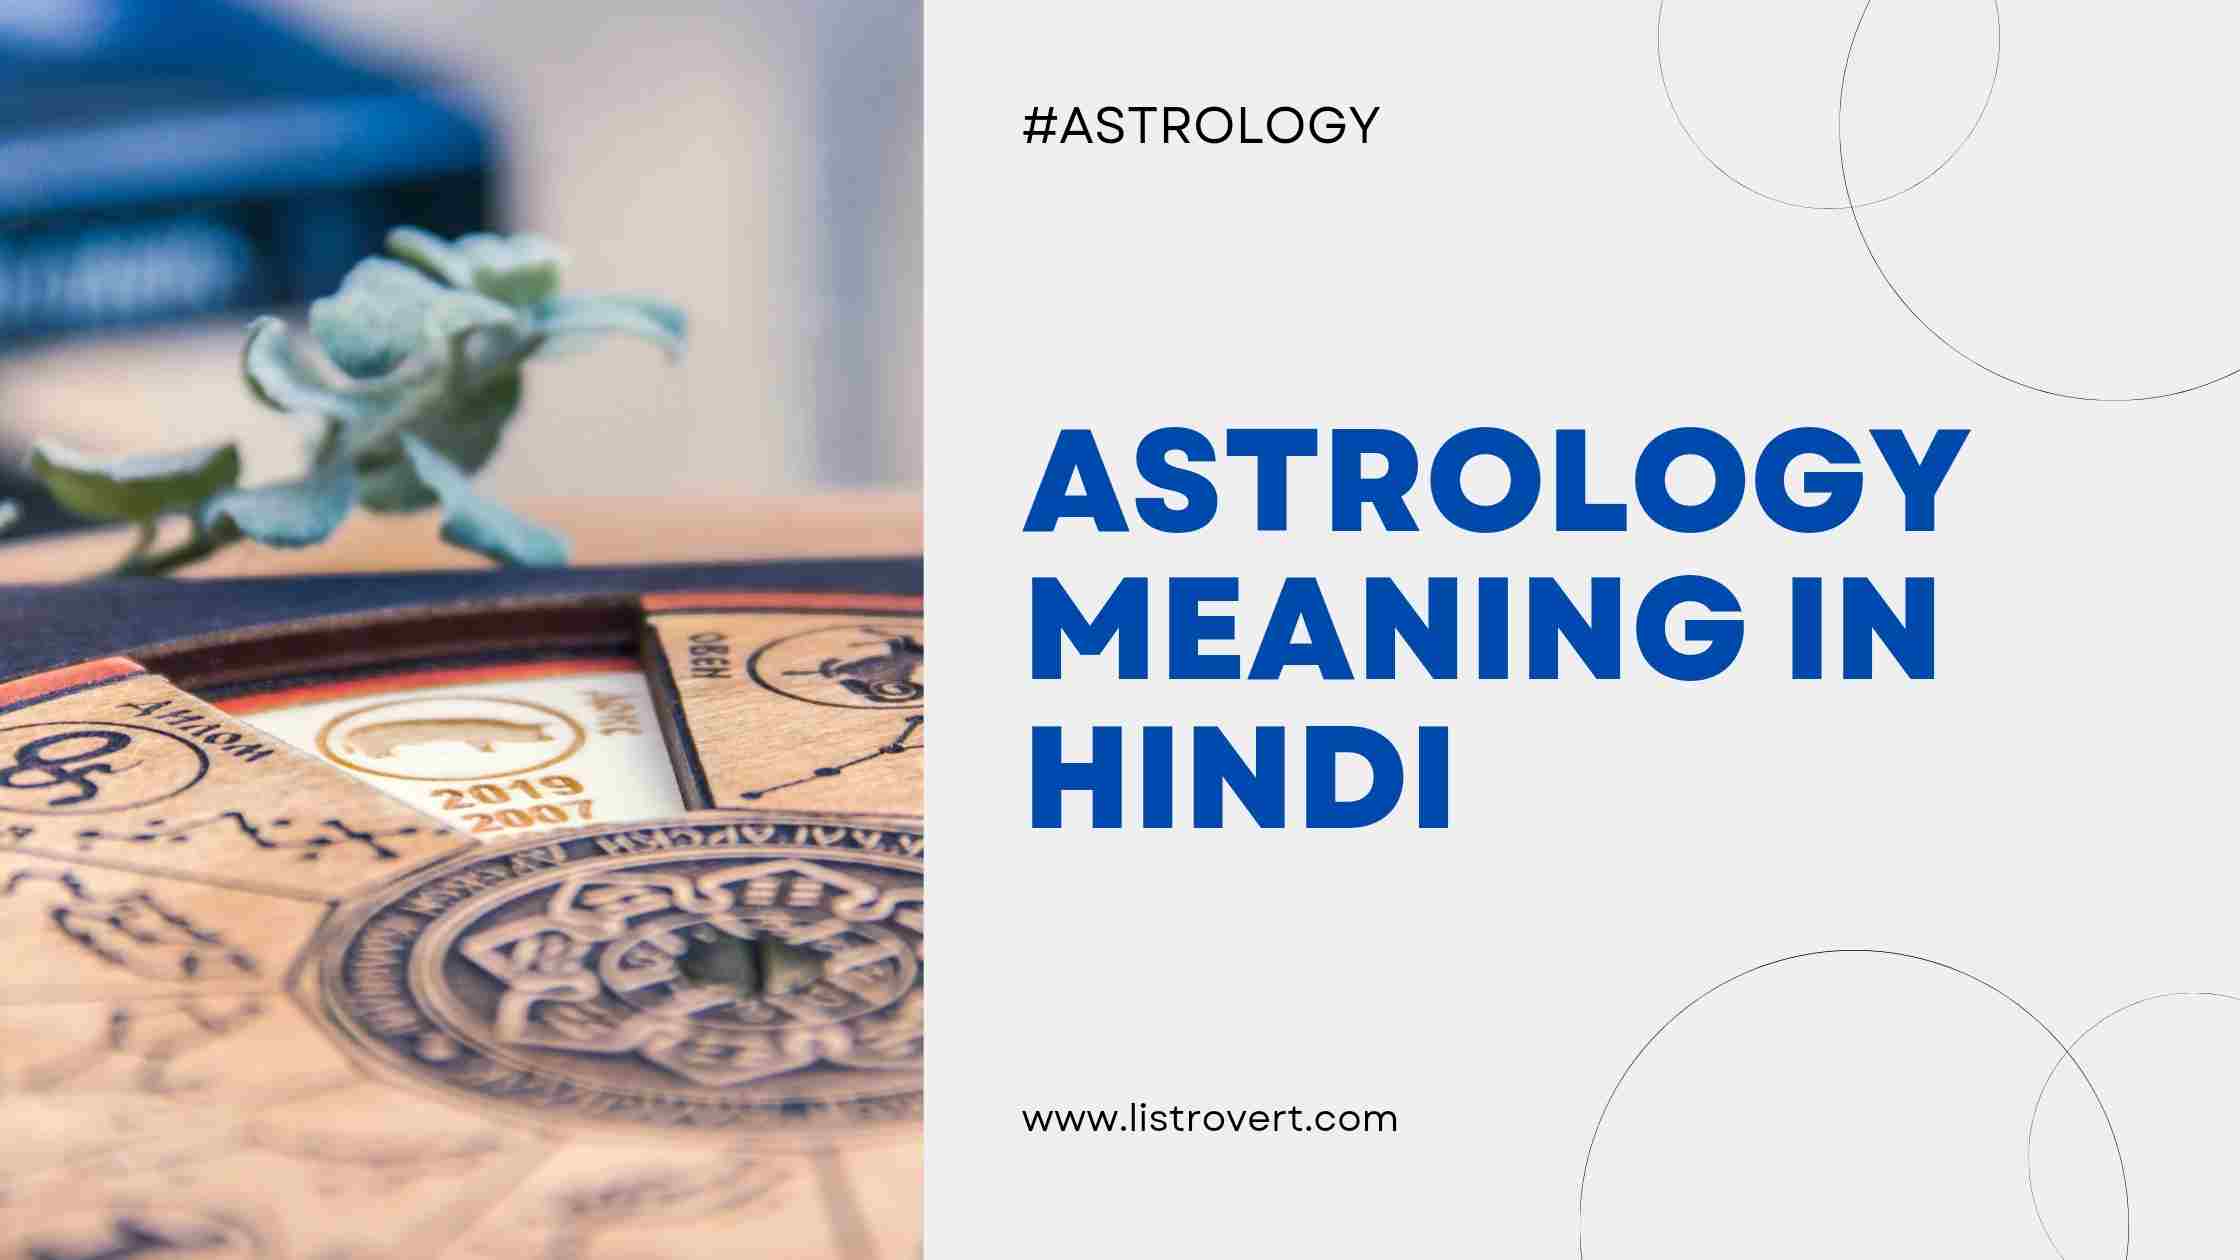 Astrology meaning in Hindi